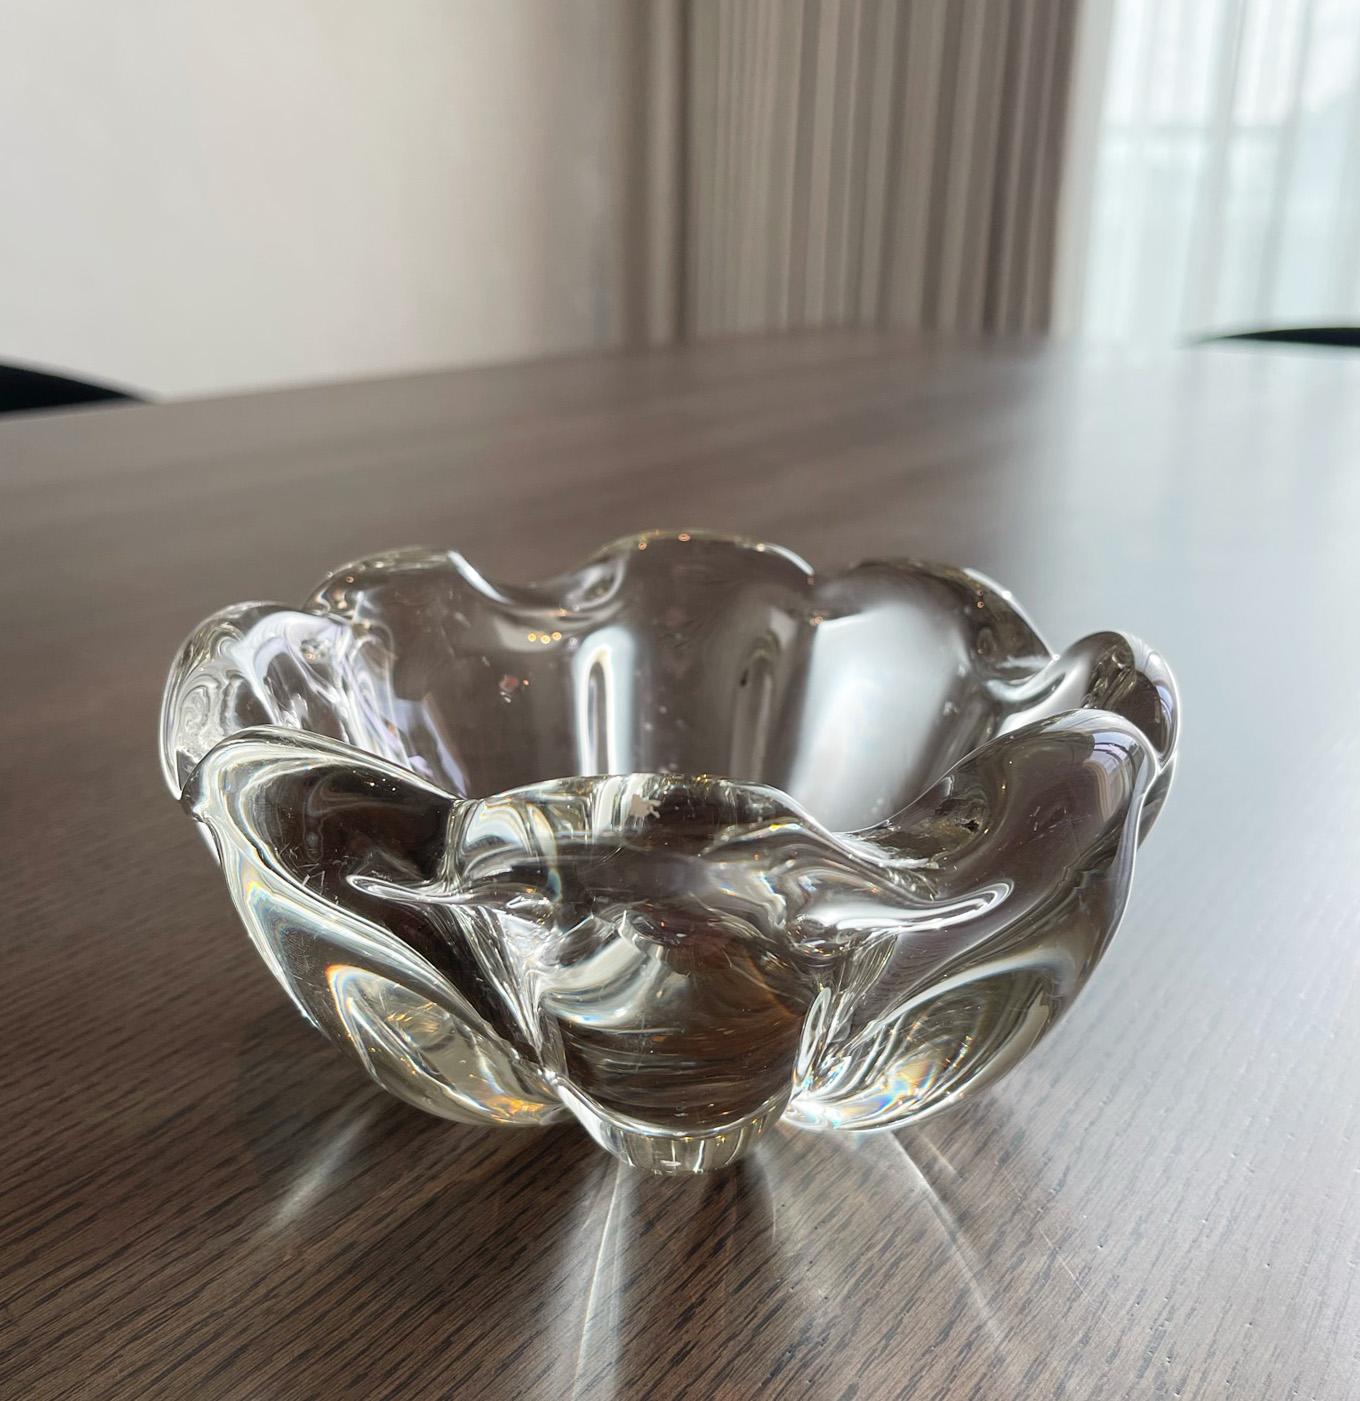 Clear crystal vide-poche.

Clear crystal vide-poche dish, attributed to Daum Crystal. 

Beautiful organic forms make up this dish; stylistically very 1960's. This dish is a fine example of an expert crystal maker. The base of this heavyweight